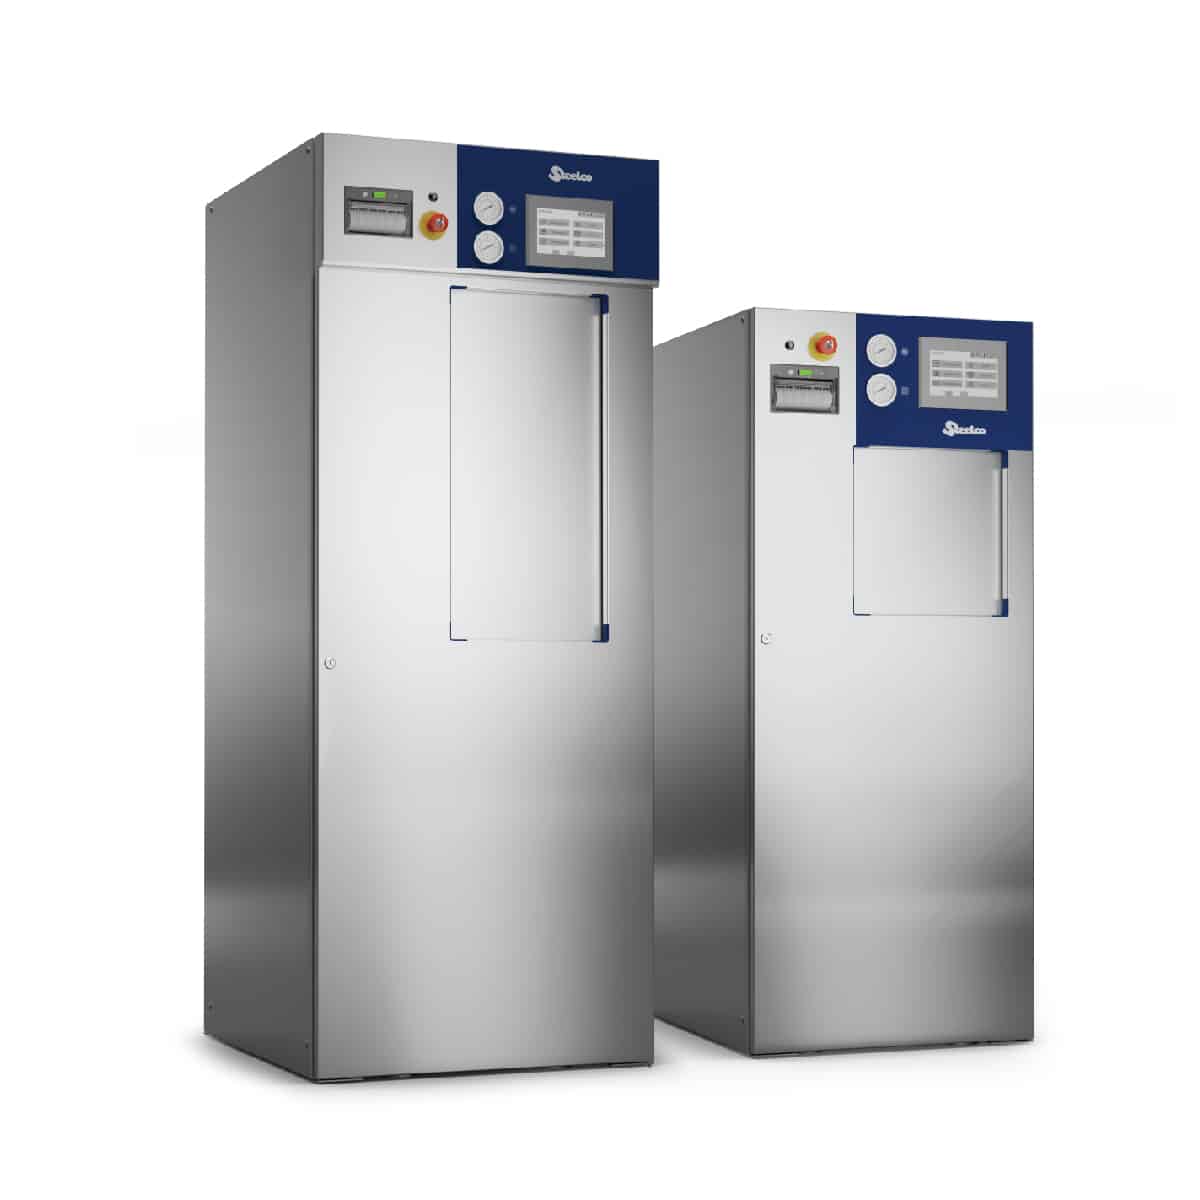 Small Capacity Autoclaves for Healthcare Facilities | Sychem